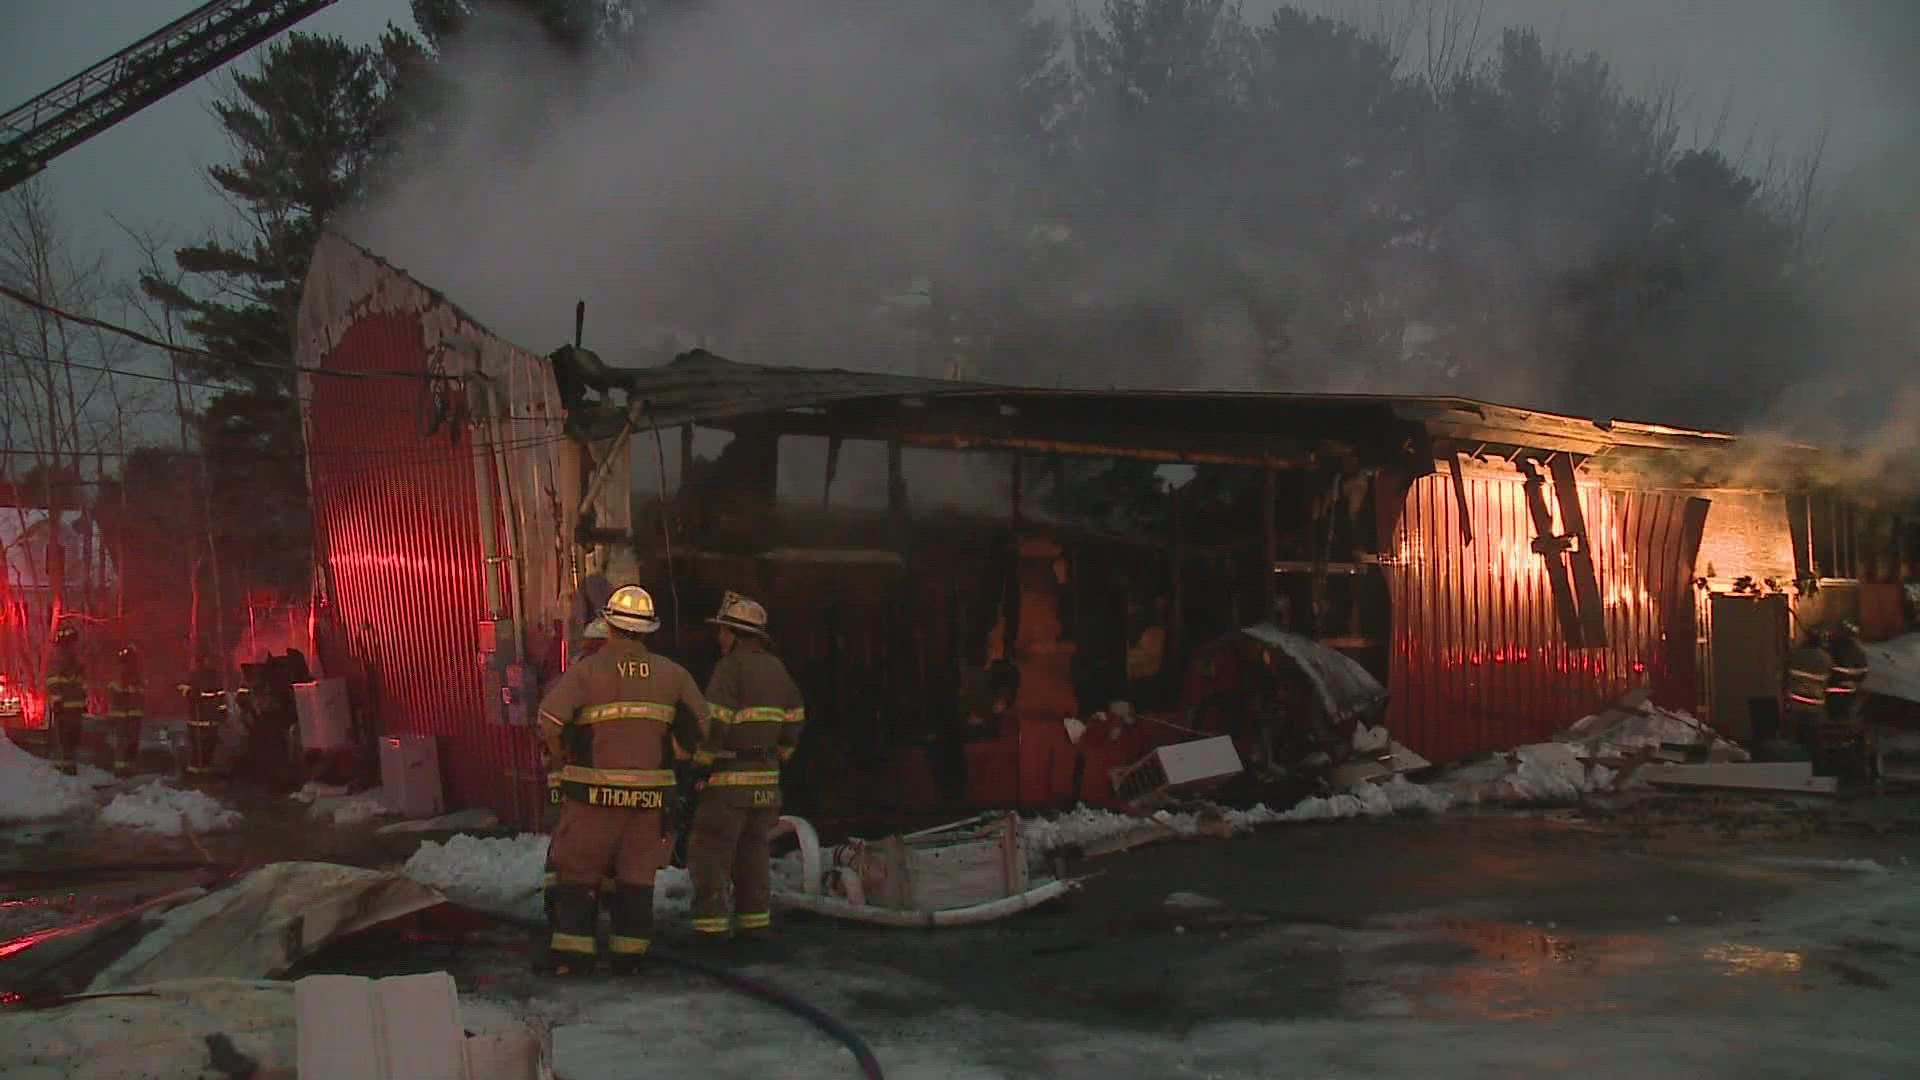 Vassalboro Fire Chief Walker Thompson said eight different fire departments helped with the blaze on Webber Pond Road.